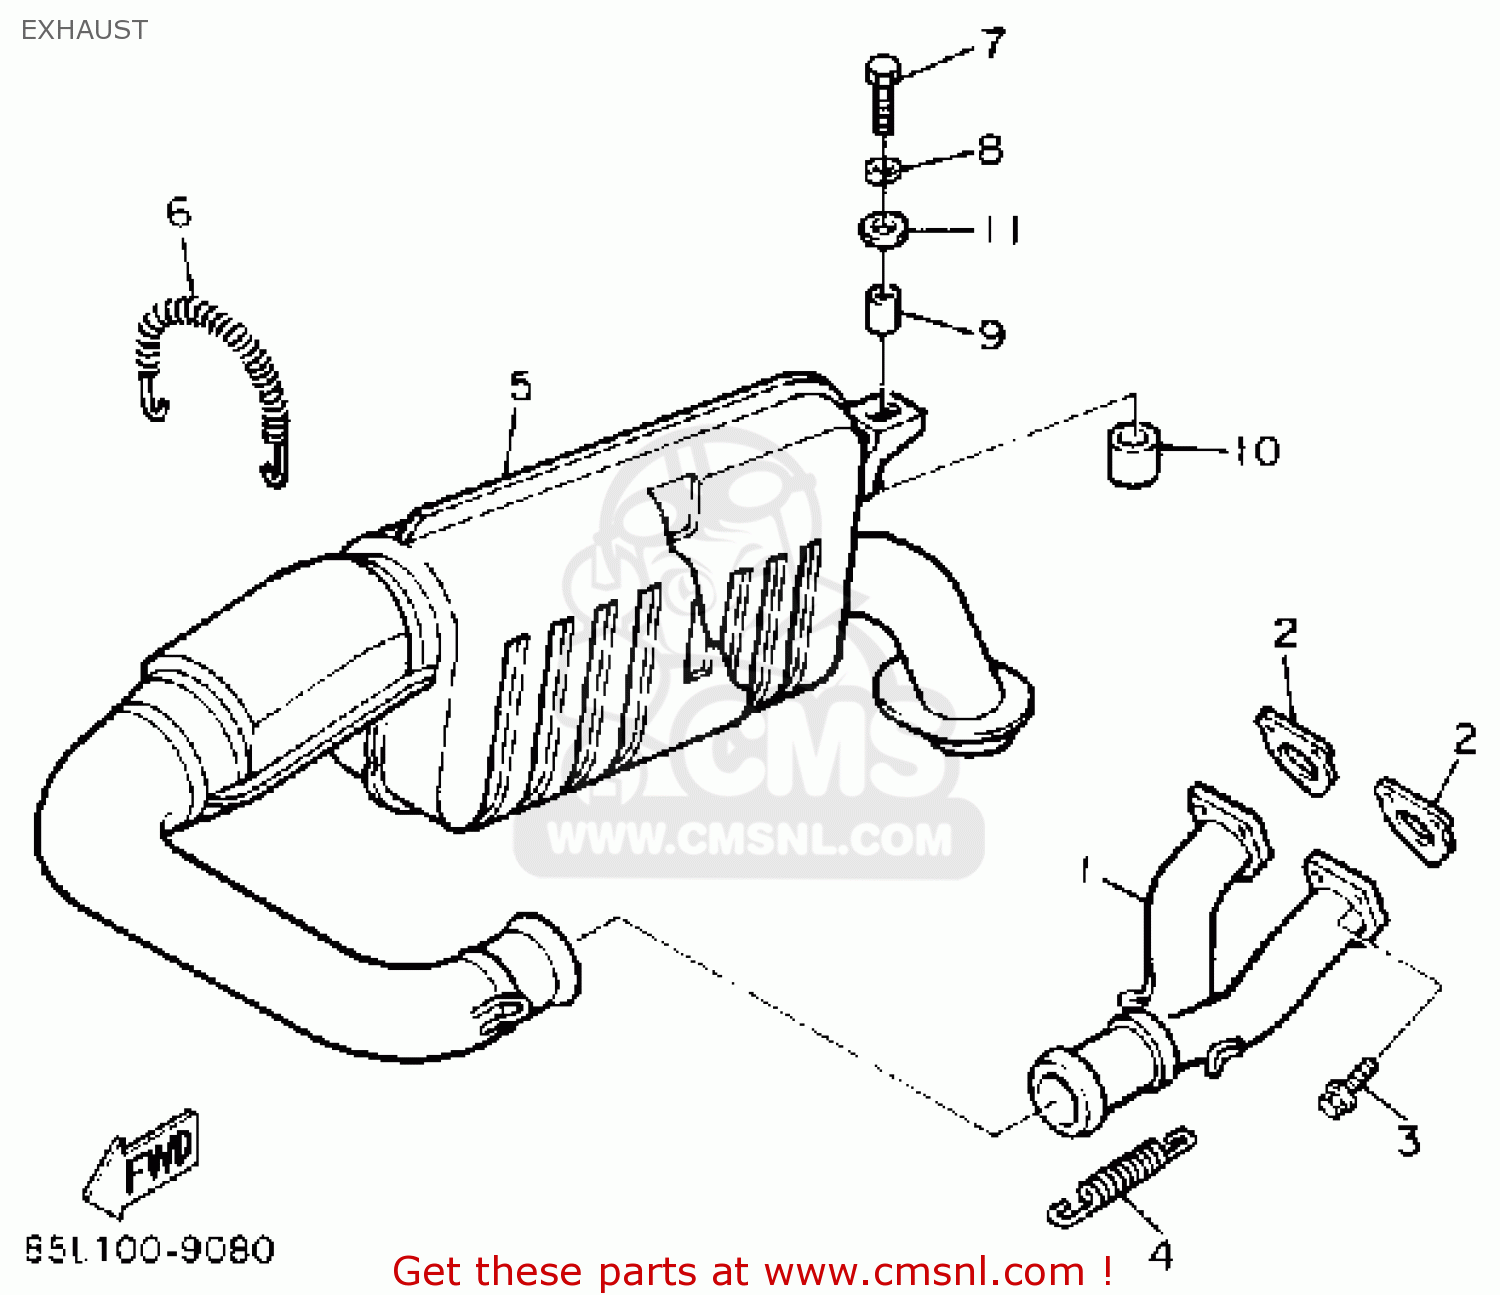 EXHAUST PIPE ASSY for CS340P OVATION 1990 - order at CMSNL